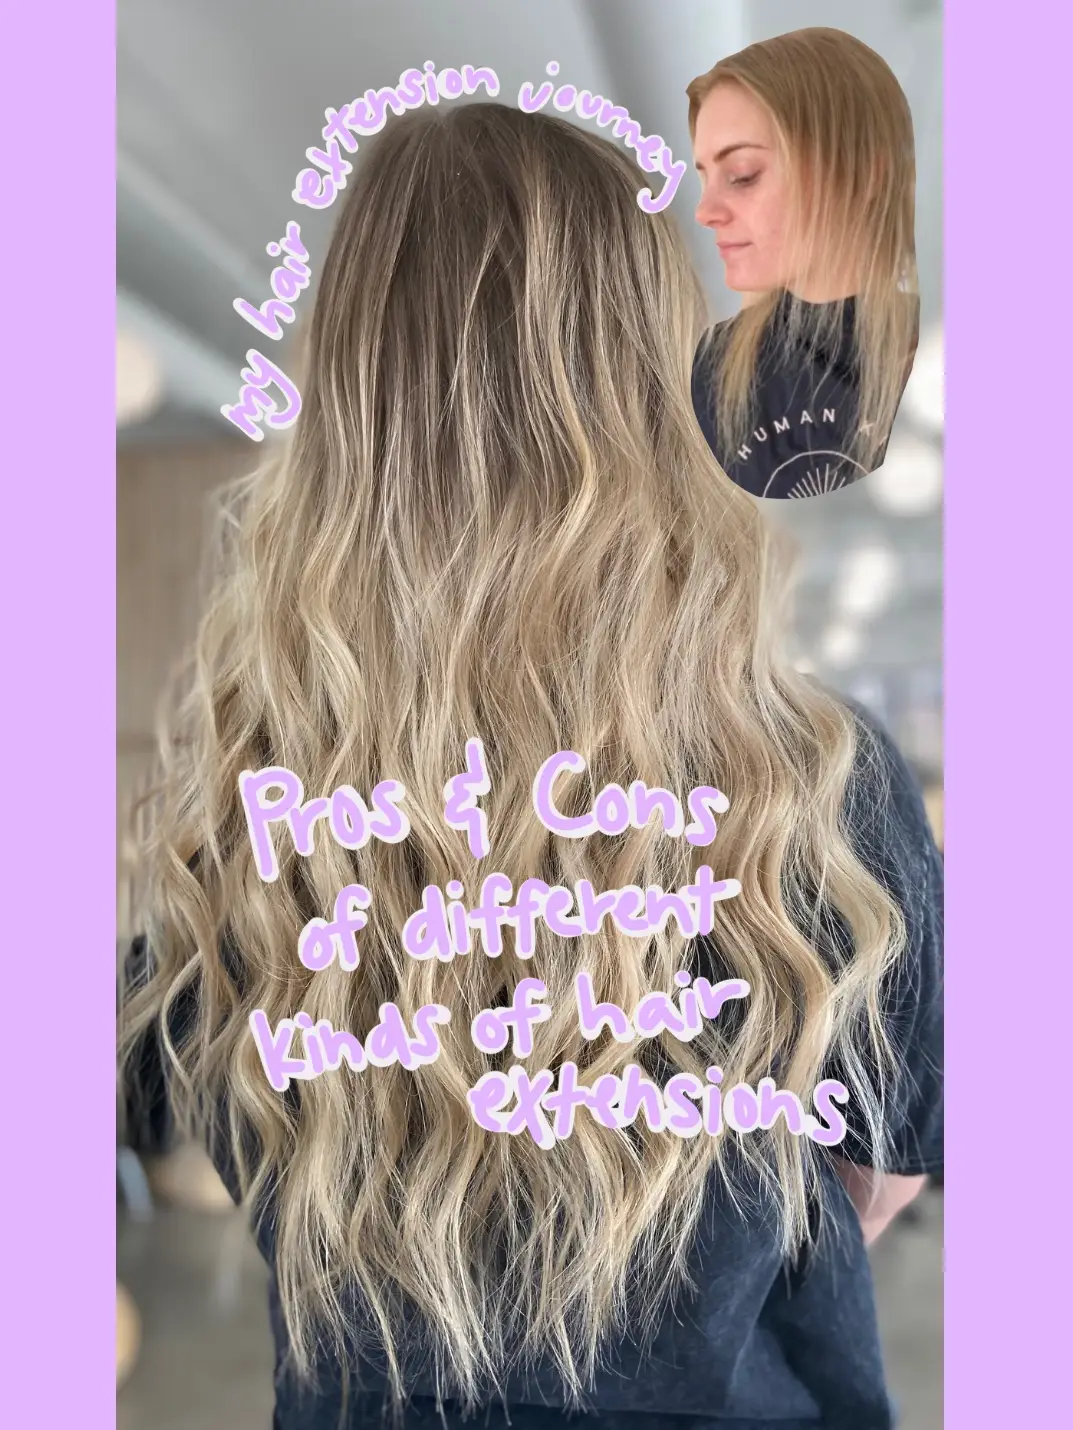 Pros & Cons of Different Hair Extensions, Gallery posted by Kaiten Draper